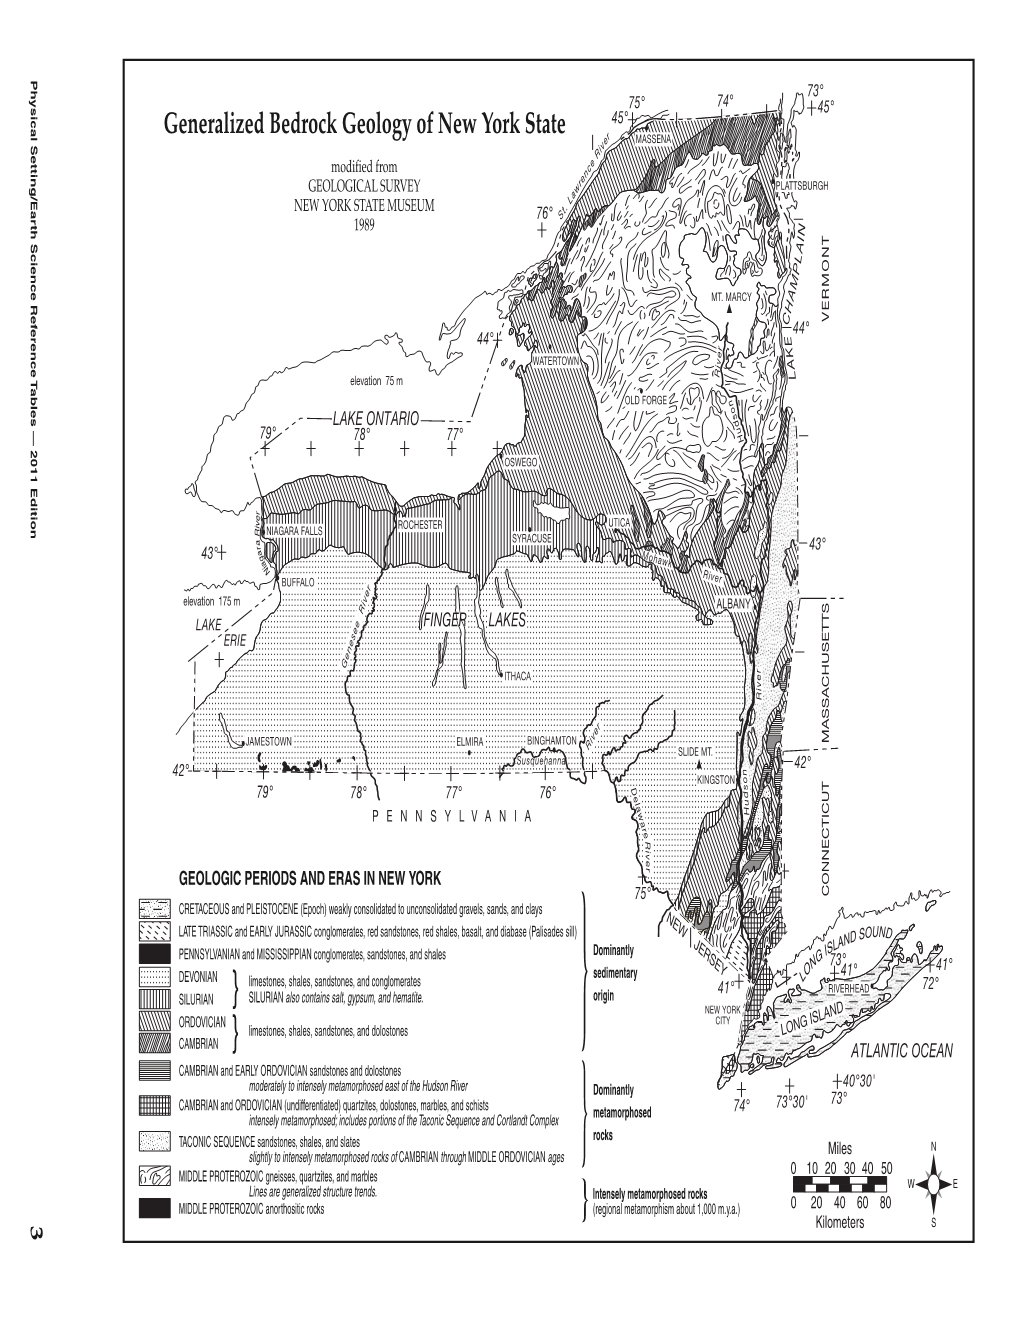 Generalized Bedrock Geology of New York State Modified